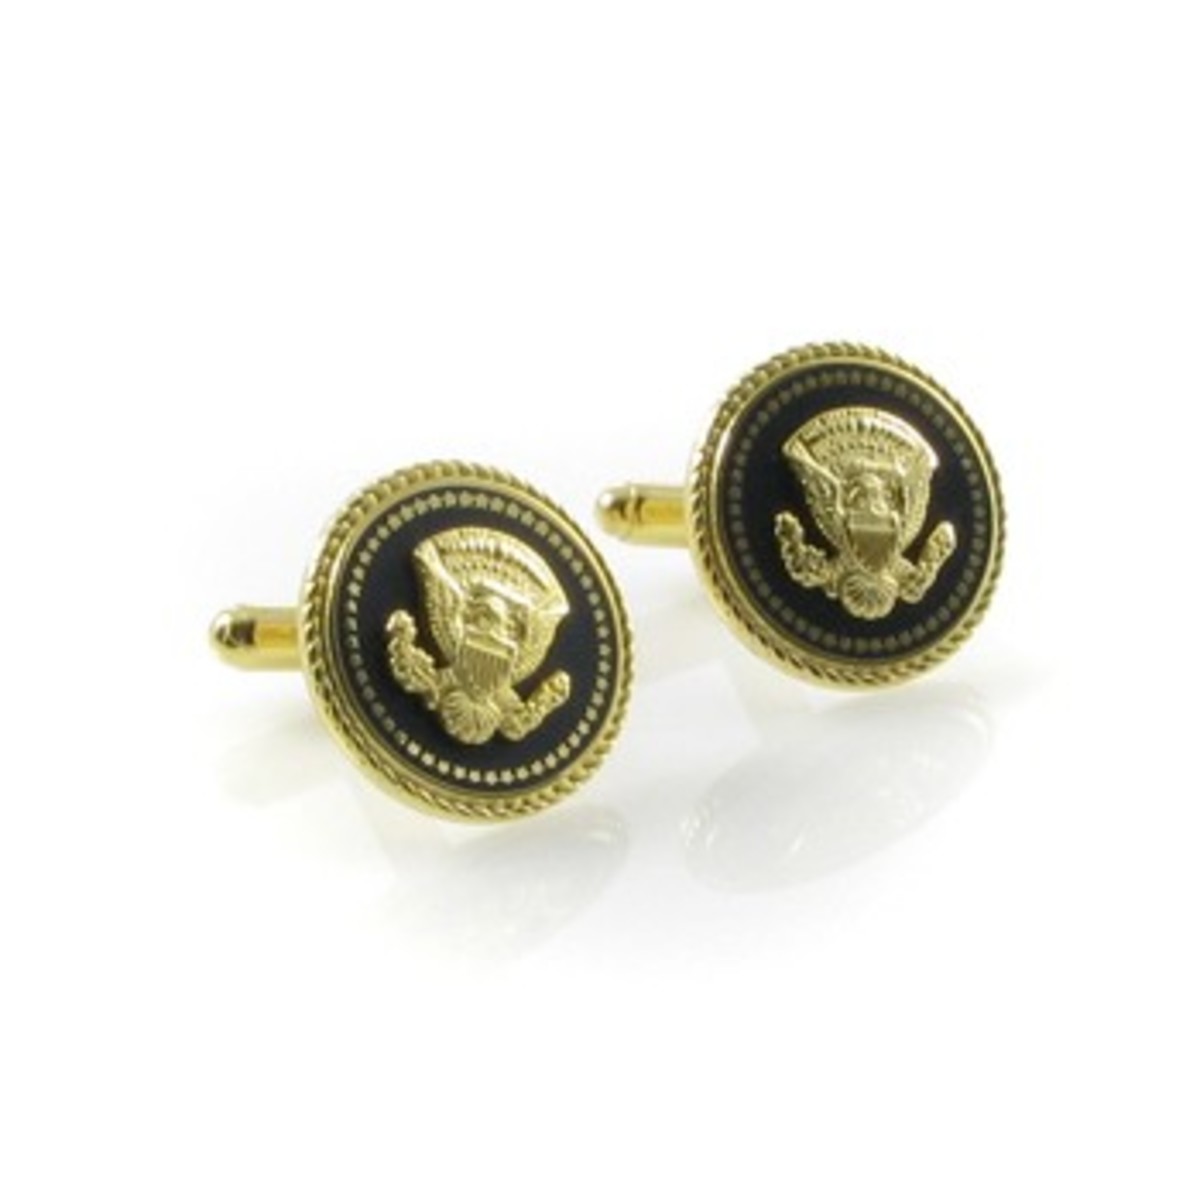 JFK Cuff Links with Regal Eagle and Blue and Gold